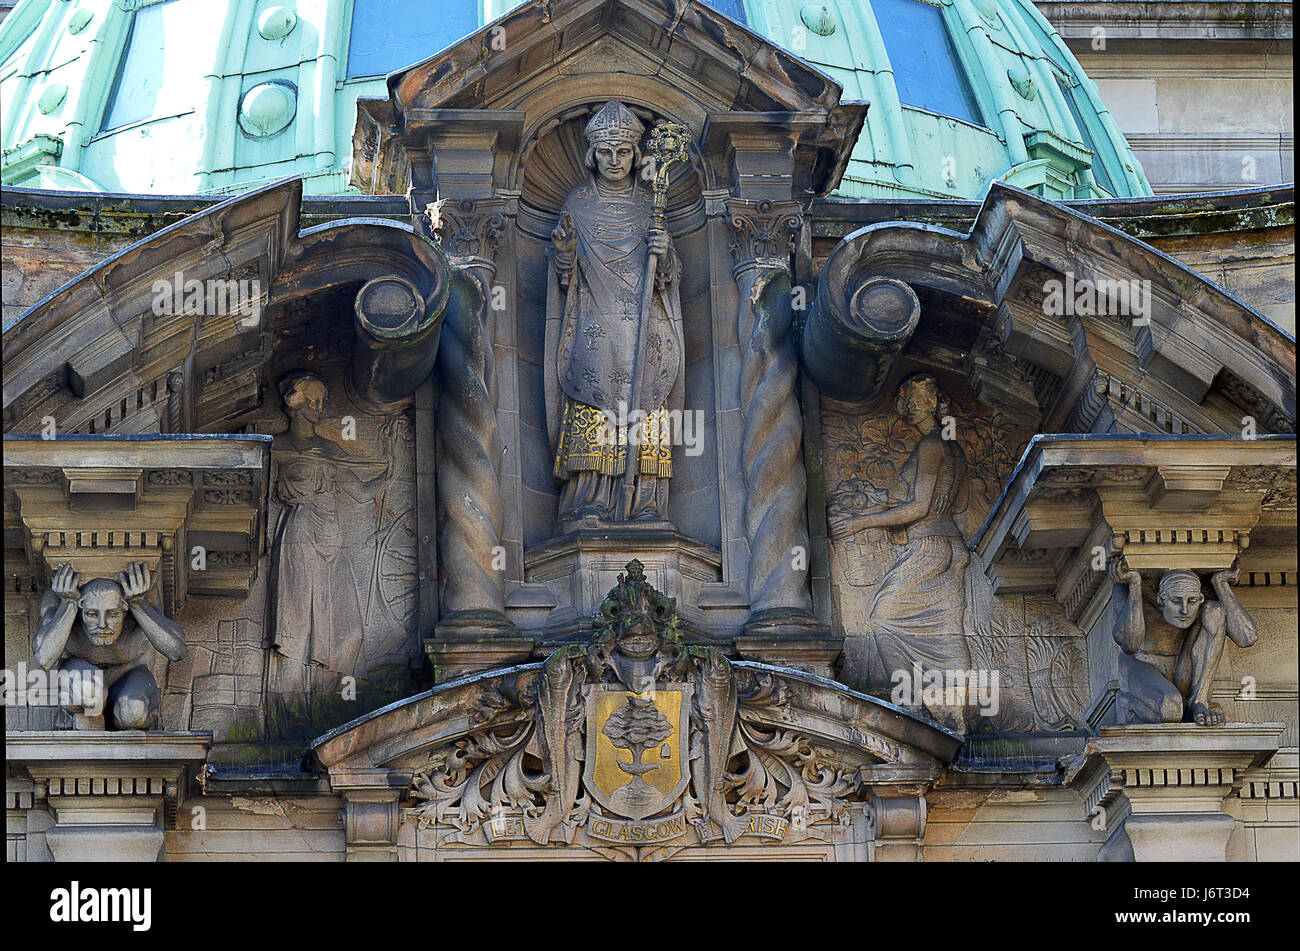 GLASGOW, SCOTLAND - 3 MAY 2017: St Mungo and the coat of arms of the city of Glasgow adorn the entrance to the former Glasgow Savings Bank Stock Photo